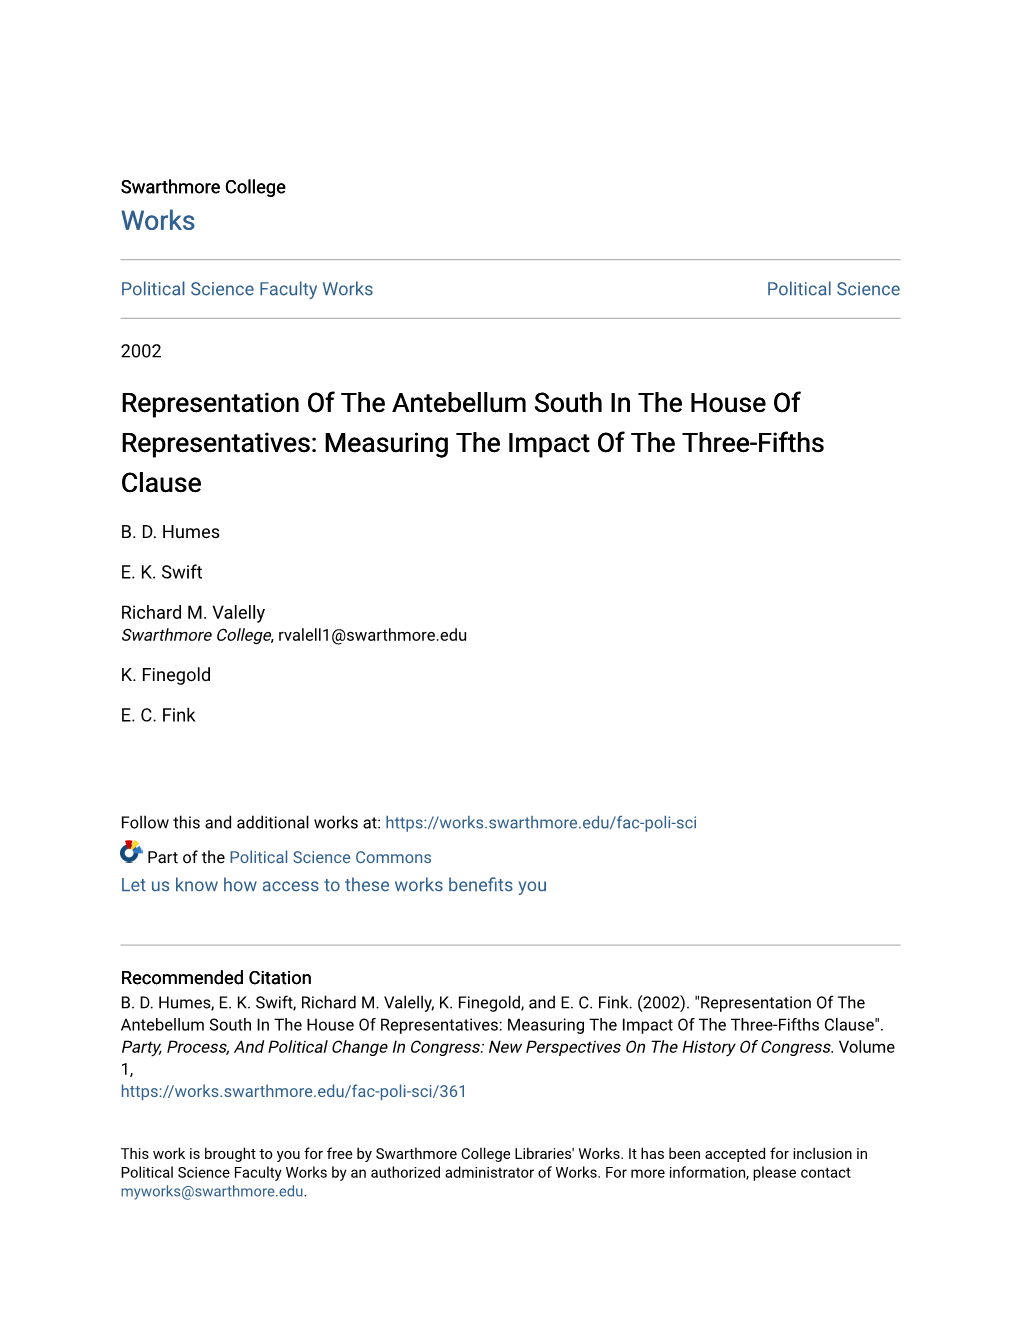 Representation of the Antebellum South in the House of Representatives: Measuring the Impact of the Three-Fifths Clause